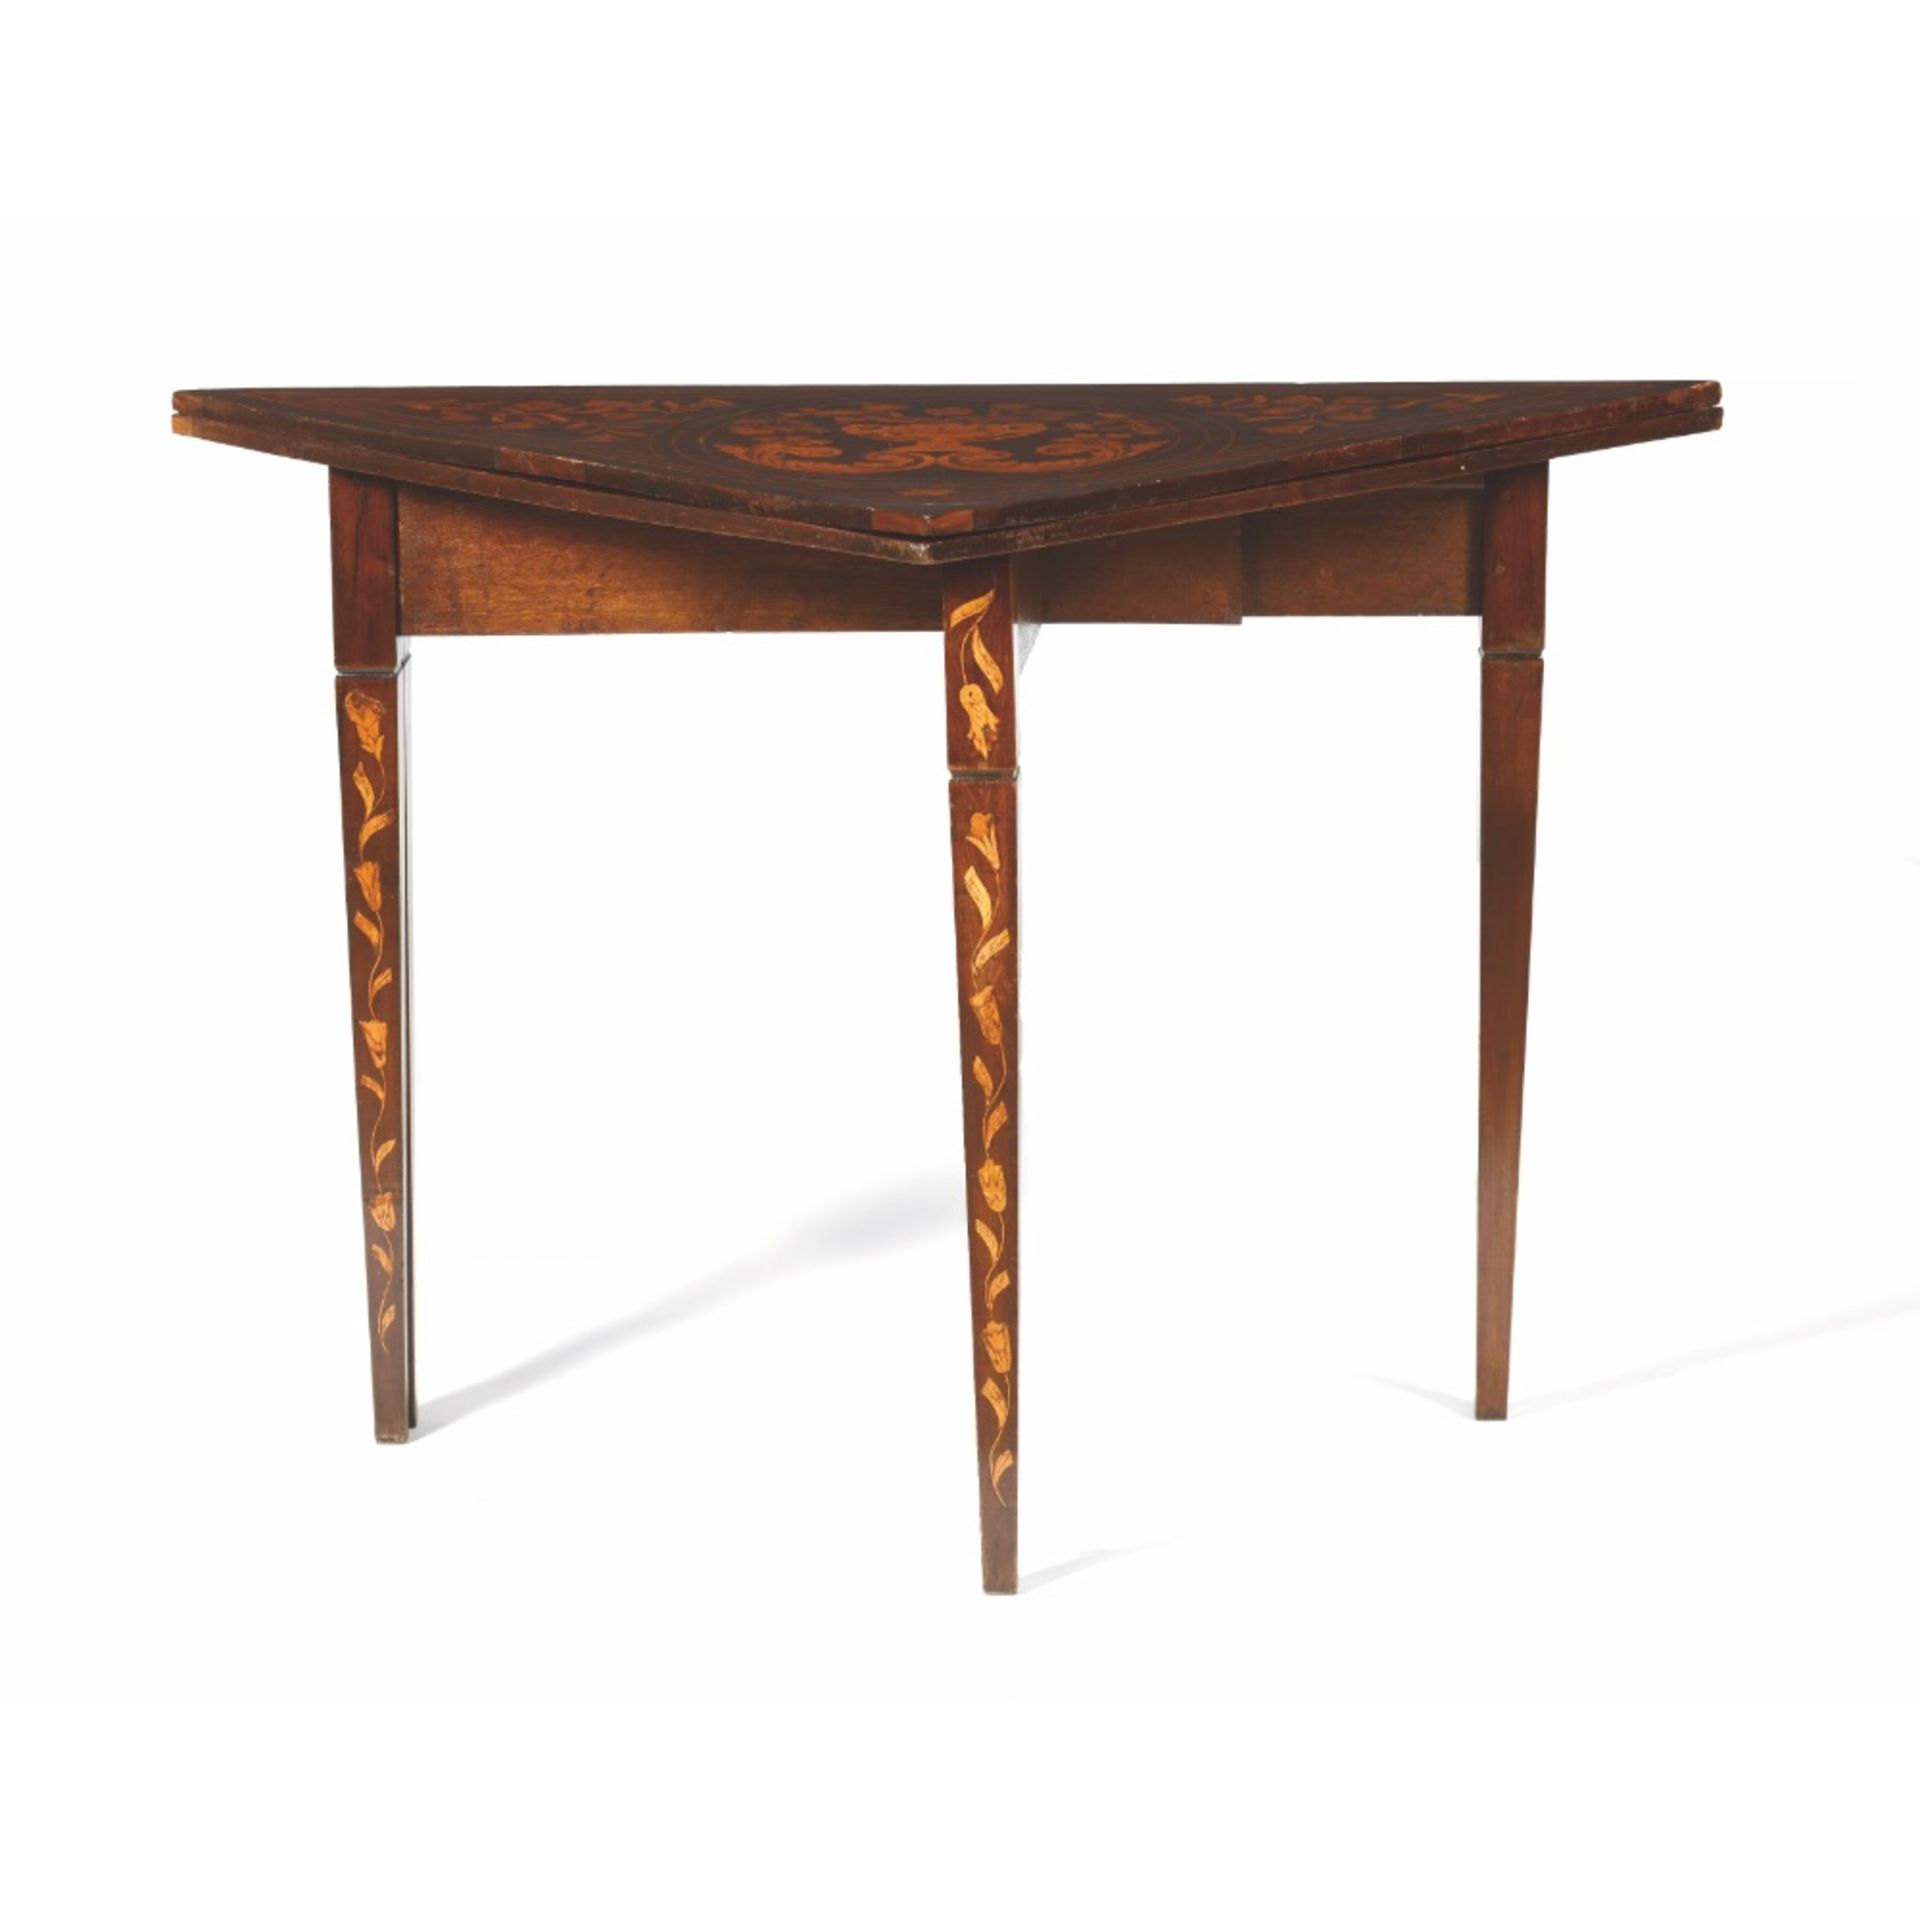 A triangular Neoclassical games table - Image 2 of 3